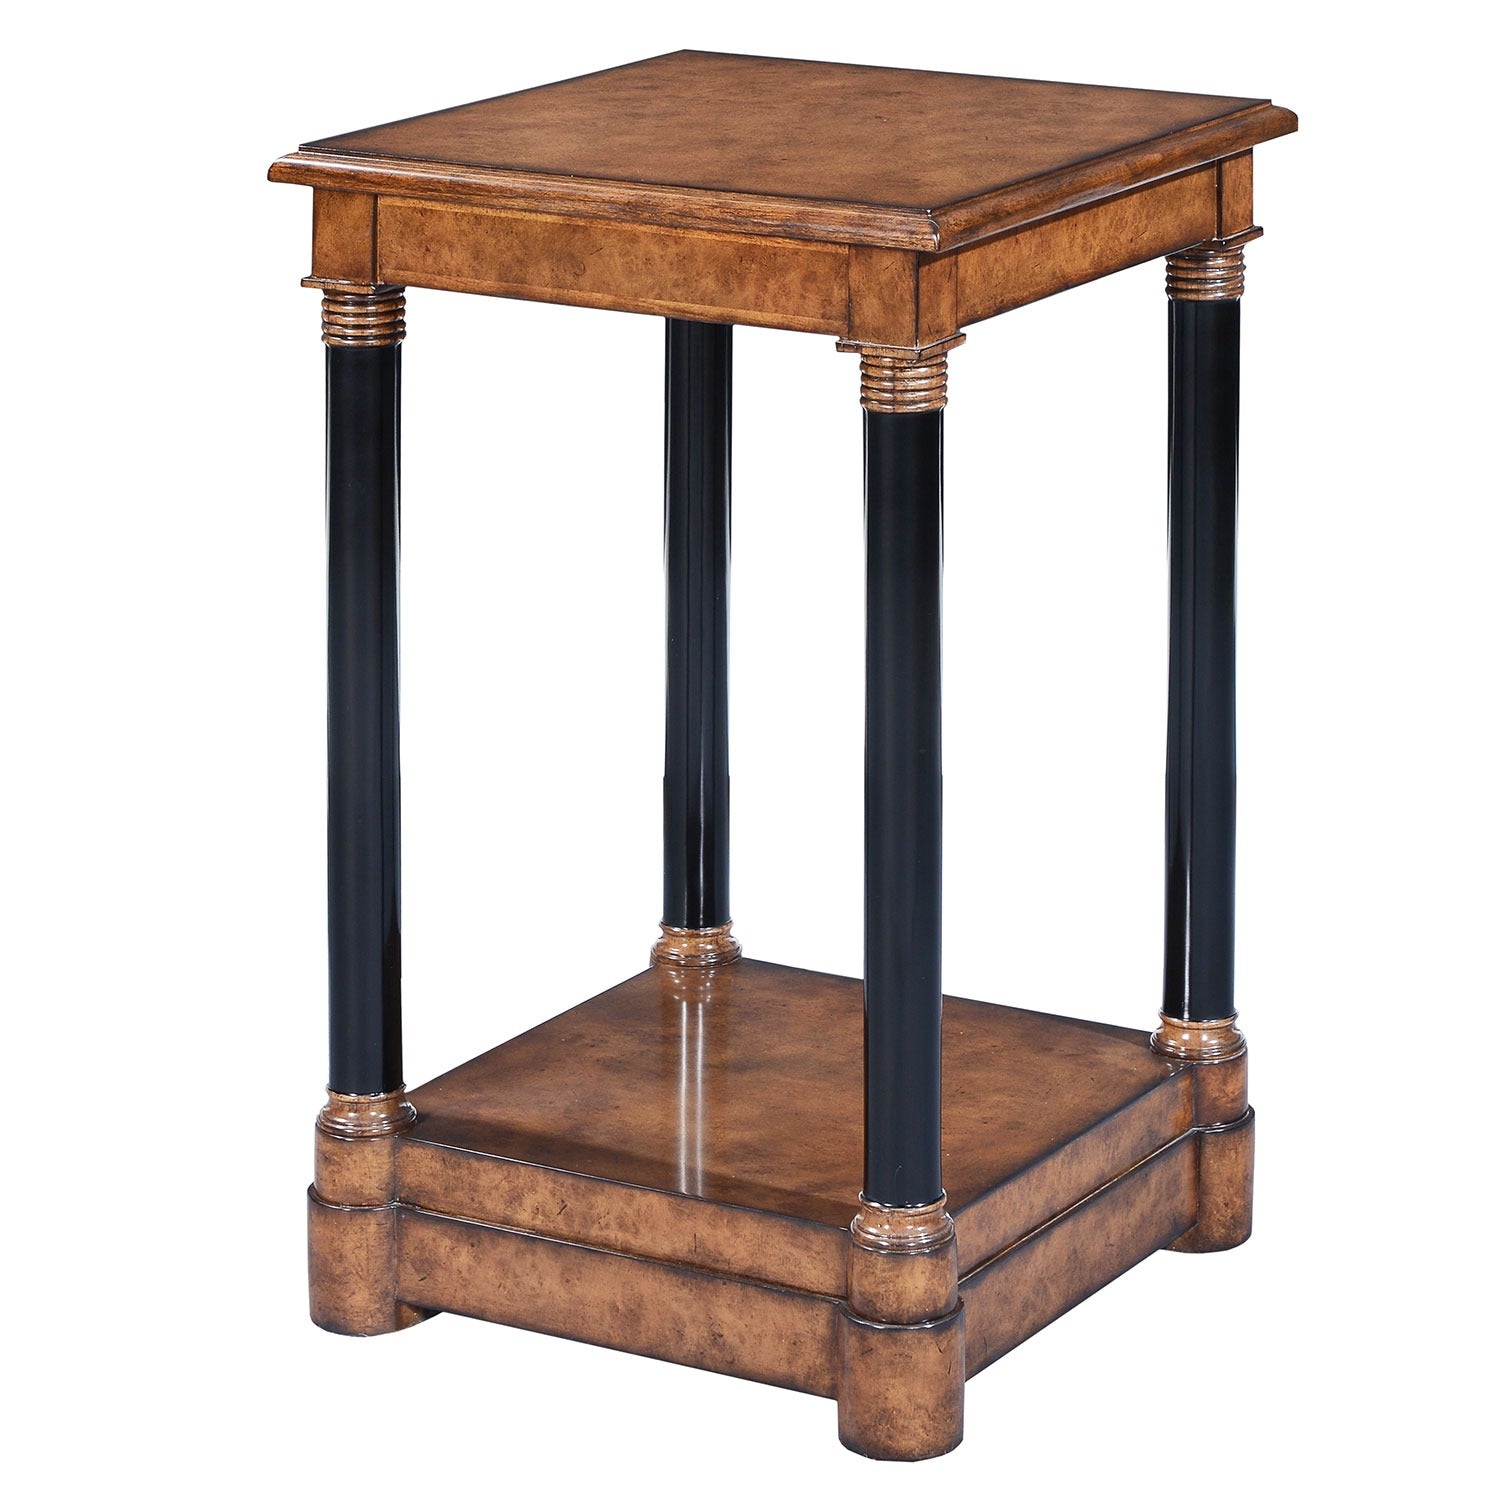 Empire style tall side table - Burr oak with ebonised legs